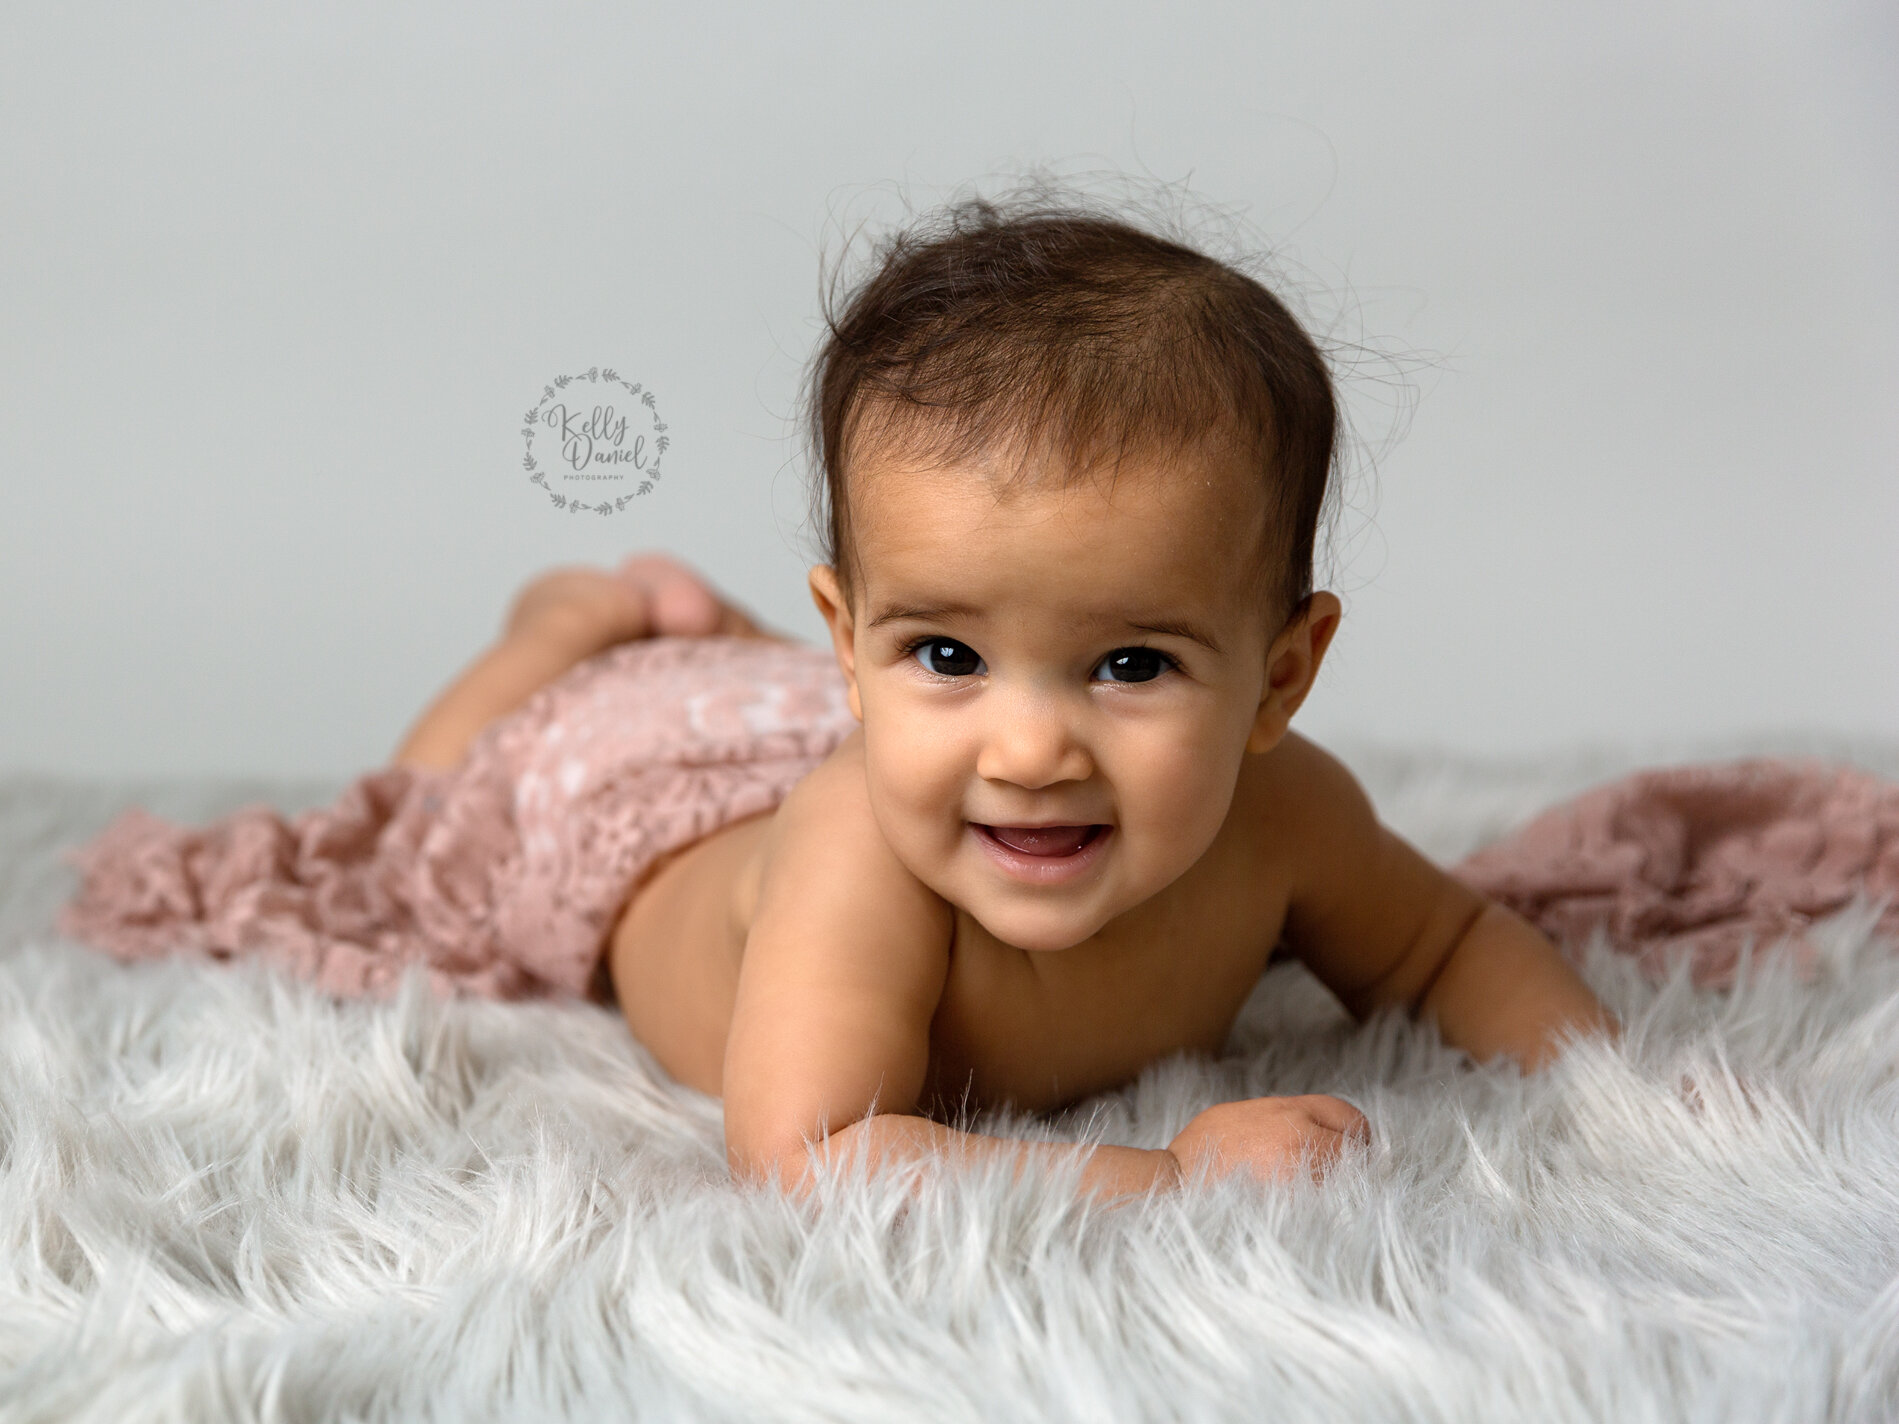 baby sitter photographer south wales, Caerphilly near cardiff